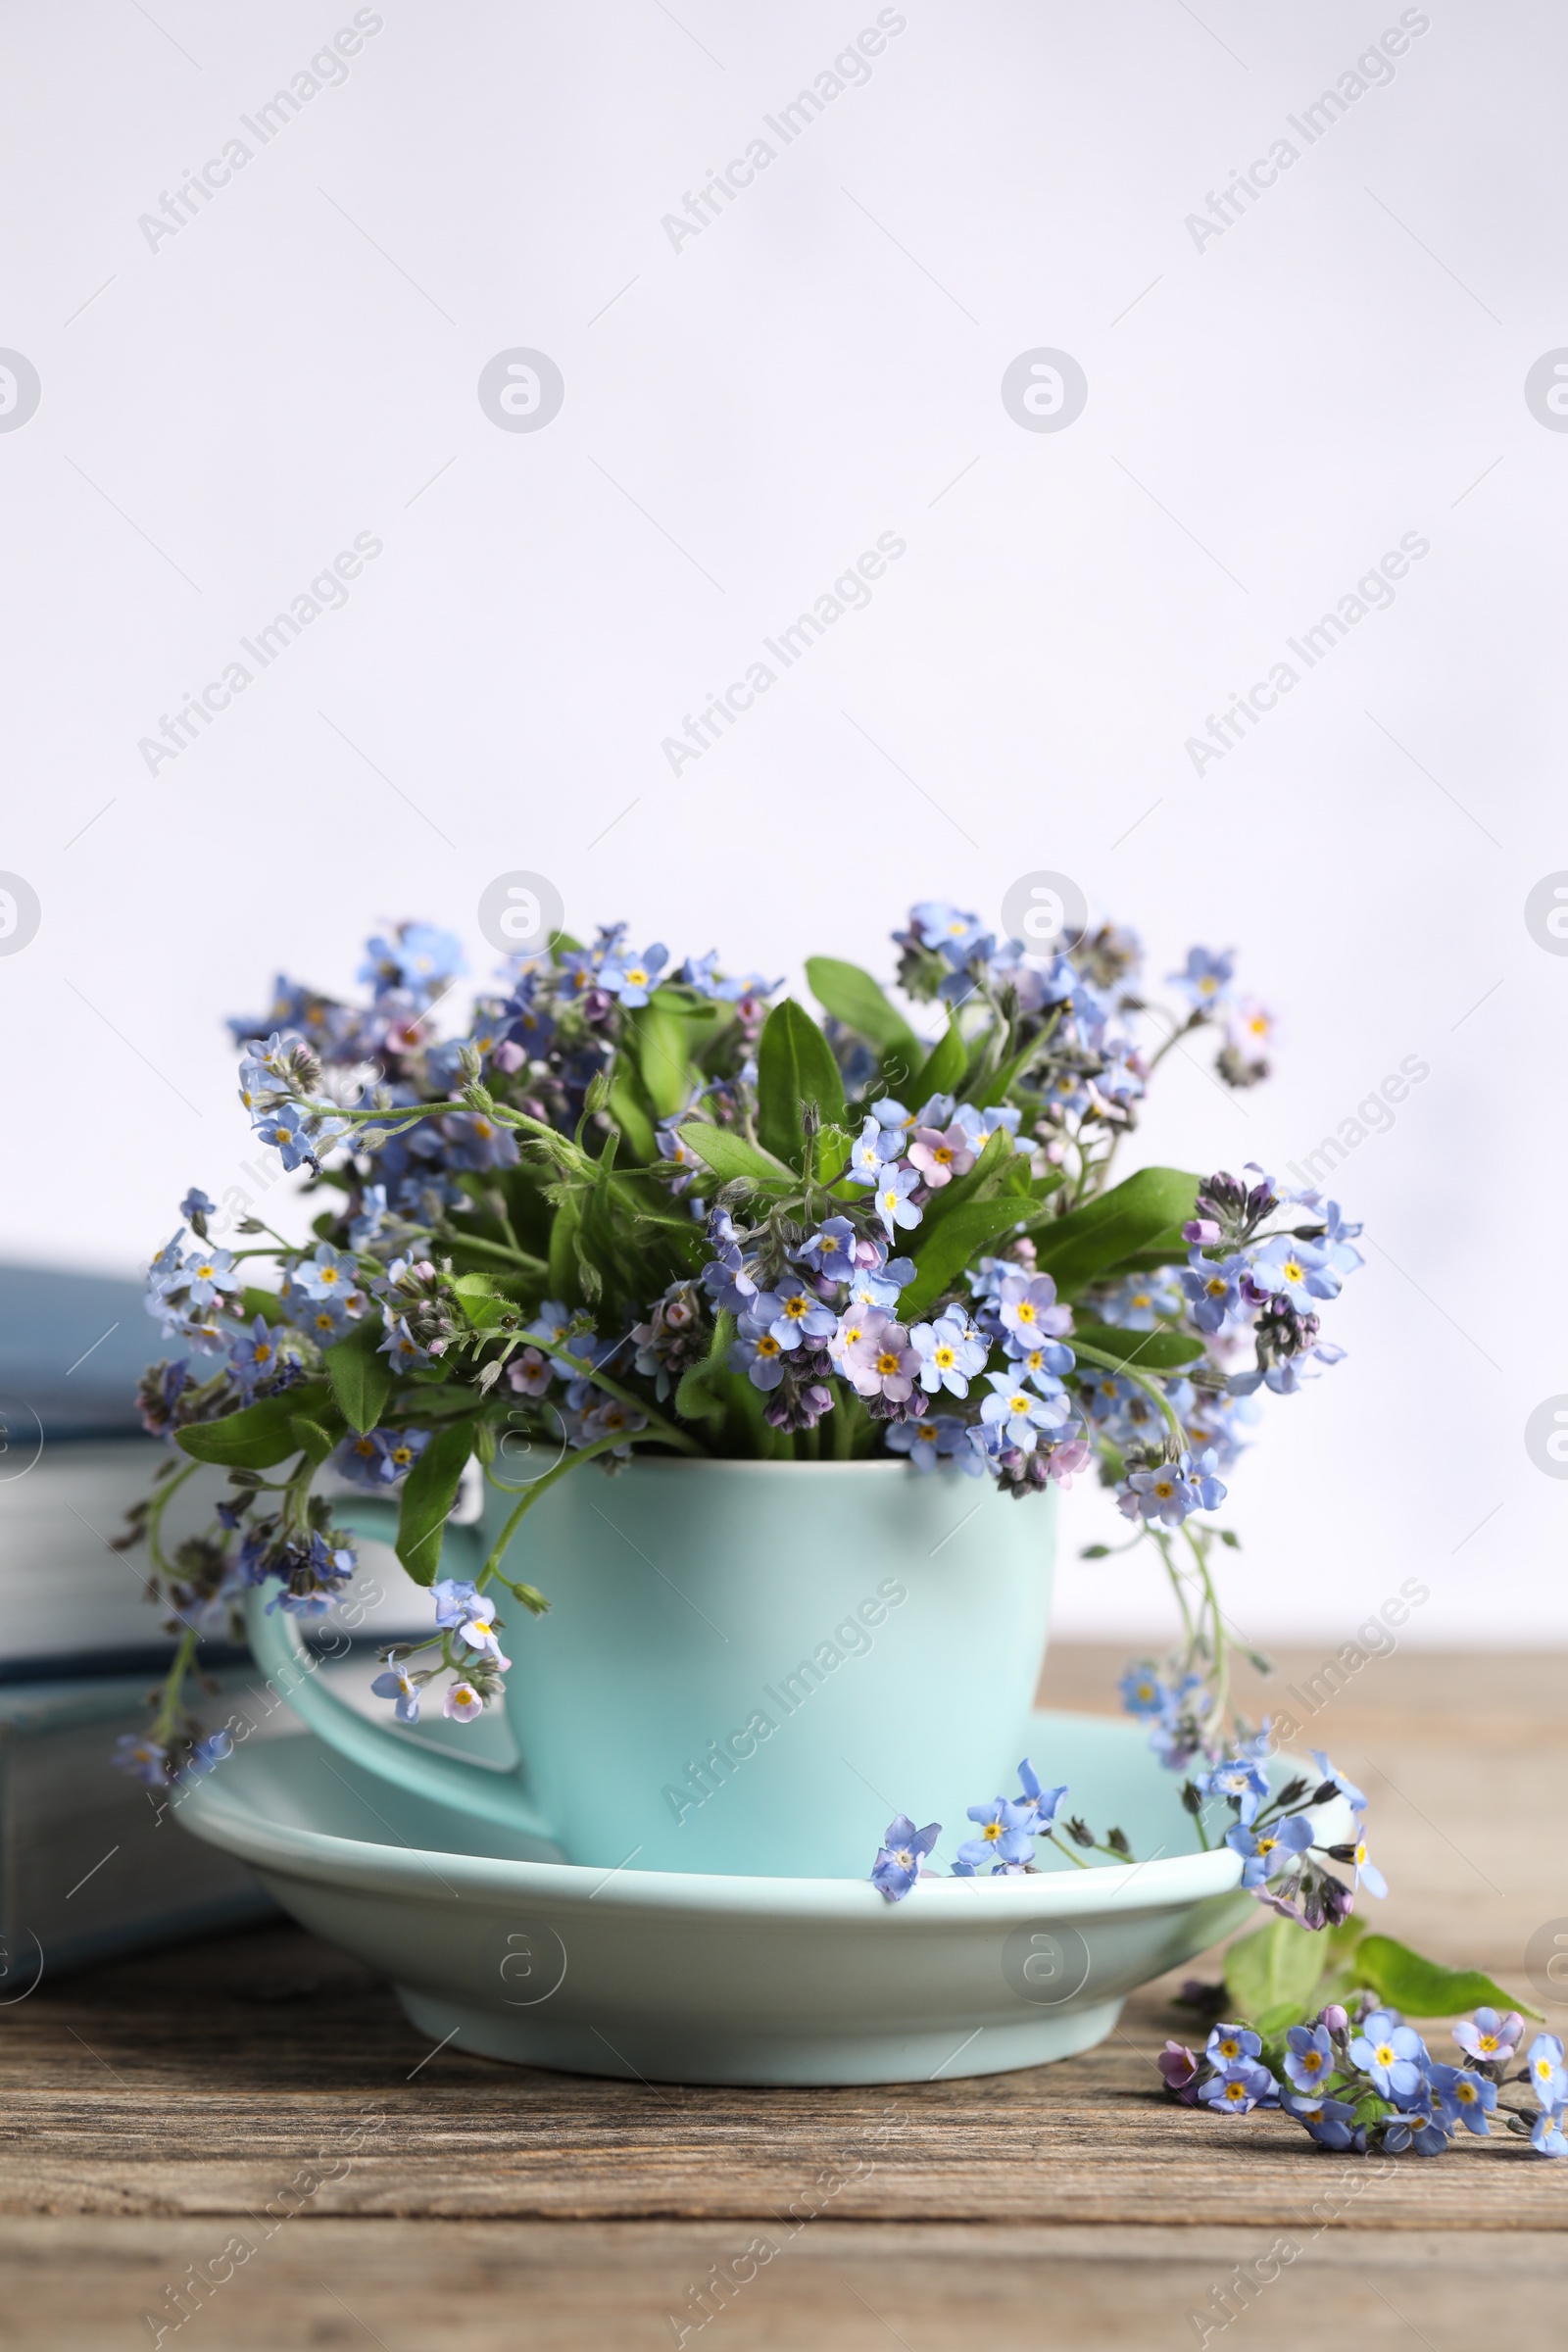 Photo of Beautiful forget-me-not flowers in cup and saucer on wooden table against light background